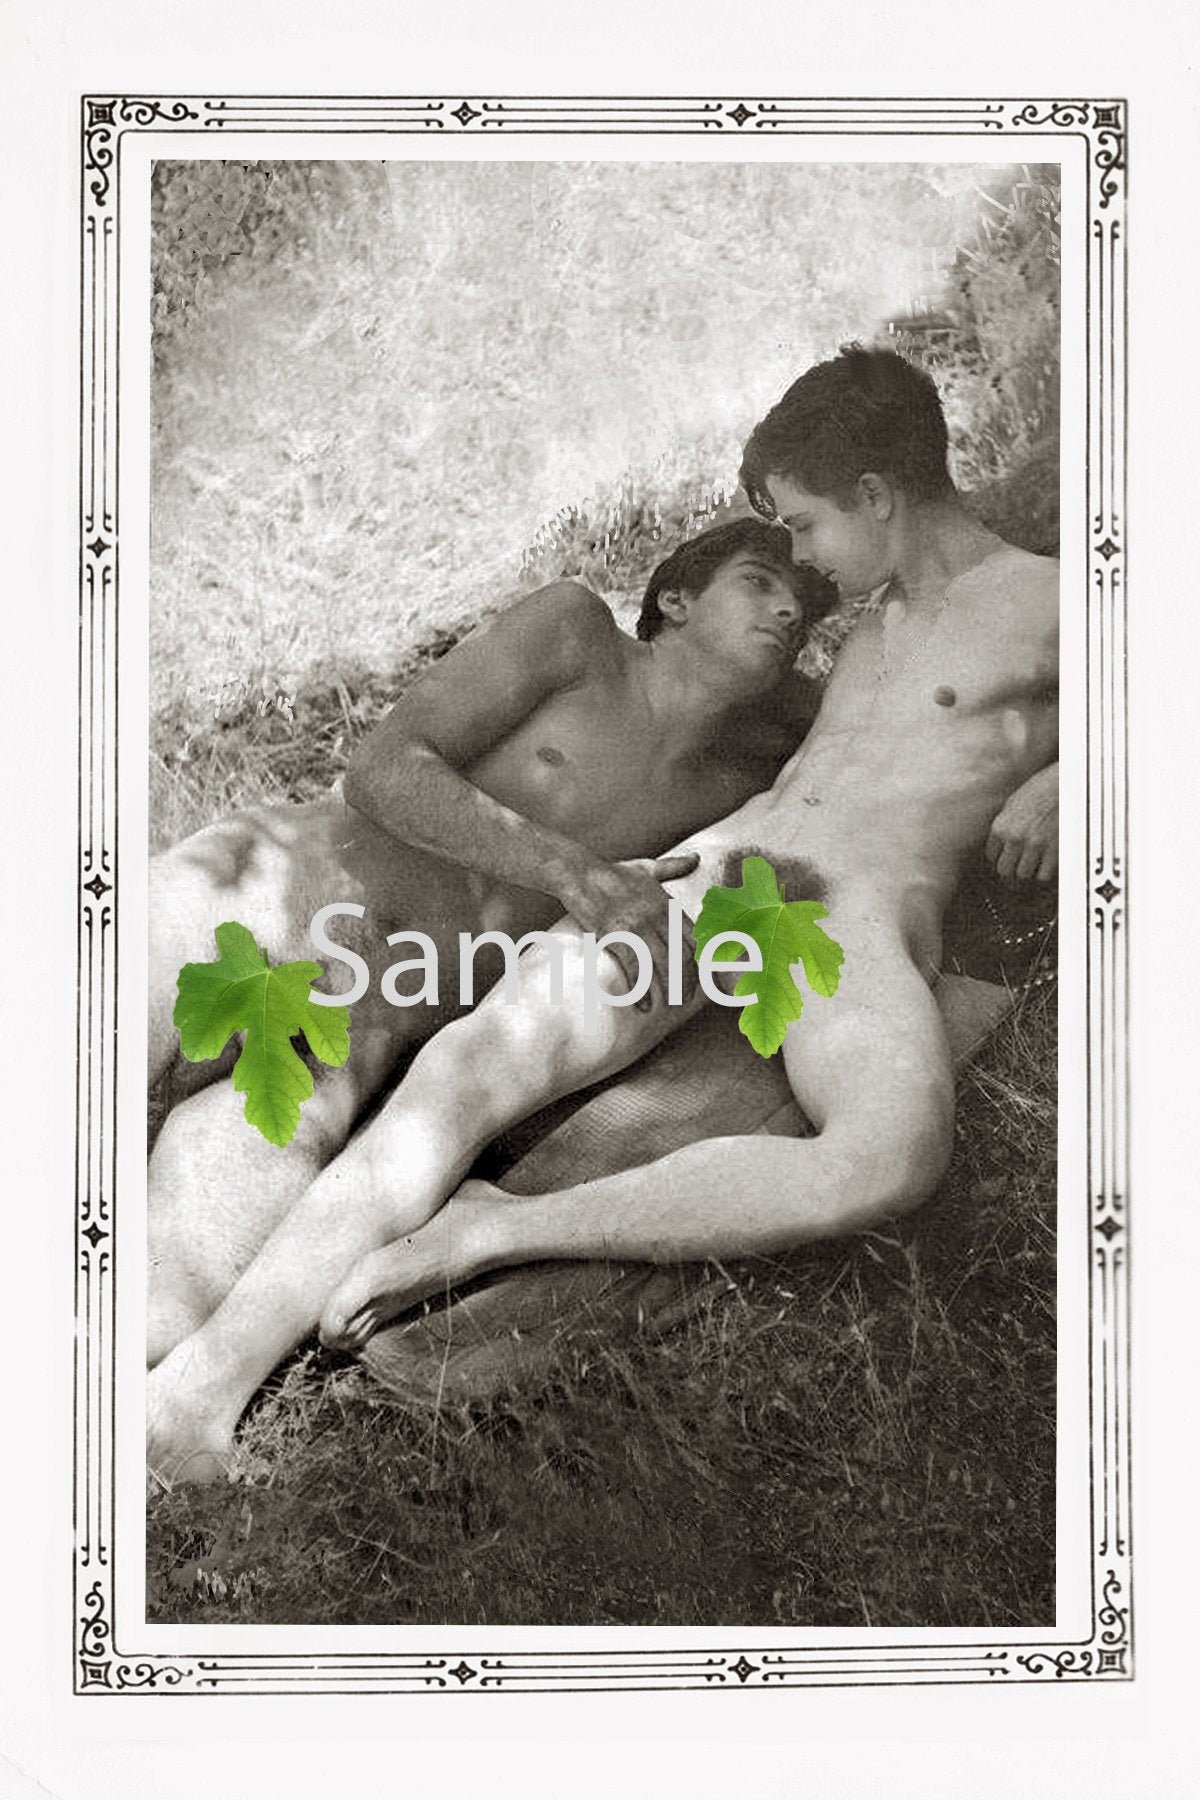 1920 Vintage Hairy Nude - Vintage 1920s Photo Reprint of Two Nude Gay Men Sharing an - Etsy